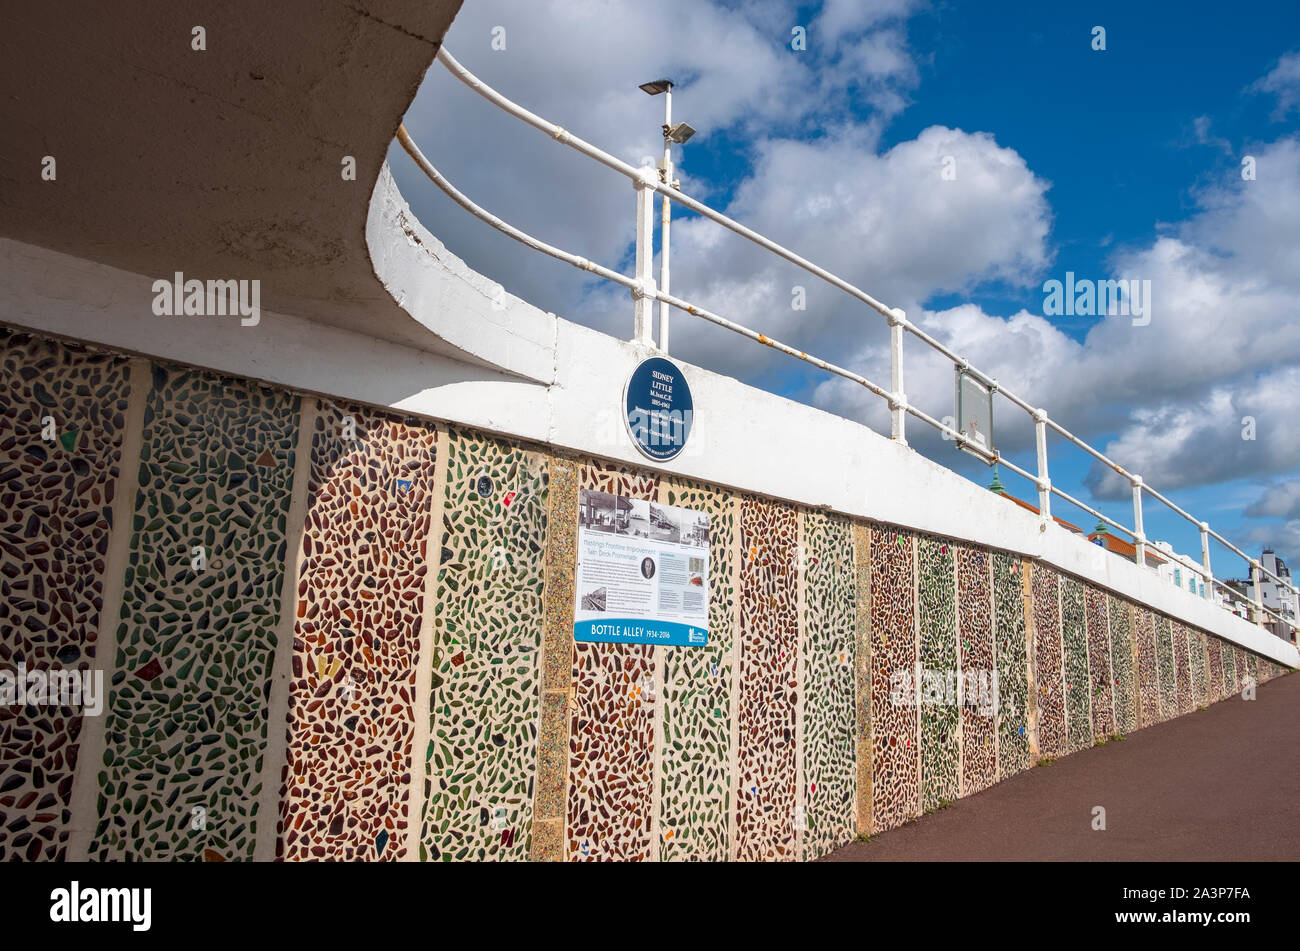 The entrance to Bottle Alley, St Leonards-on-Sea, Hastings, East Sussx, UK Stock Photo